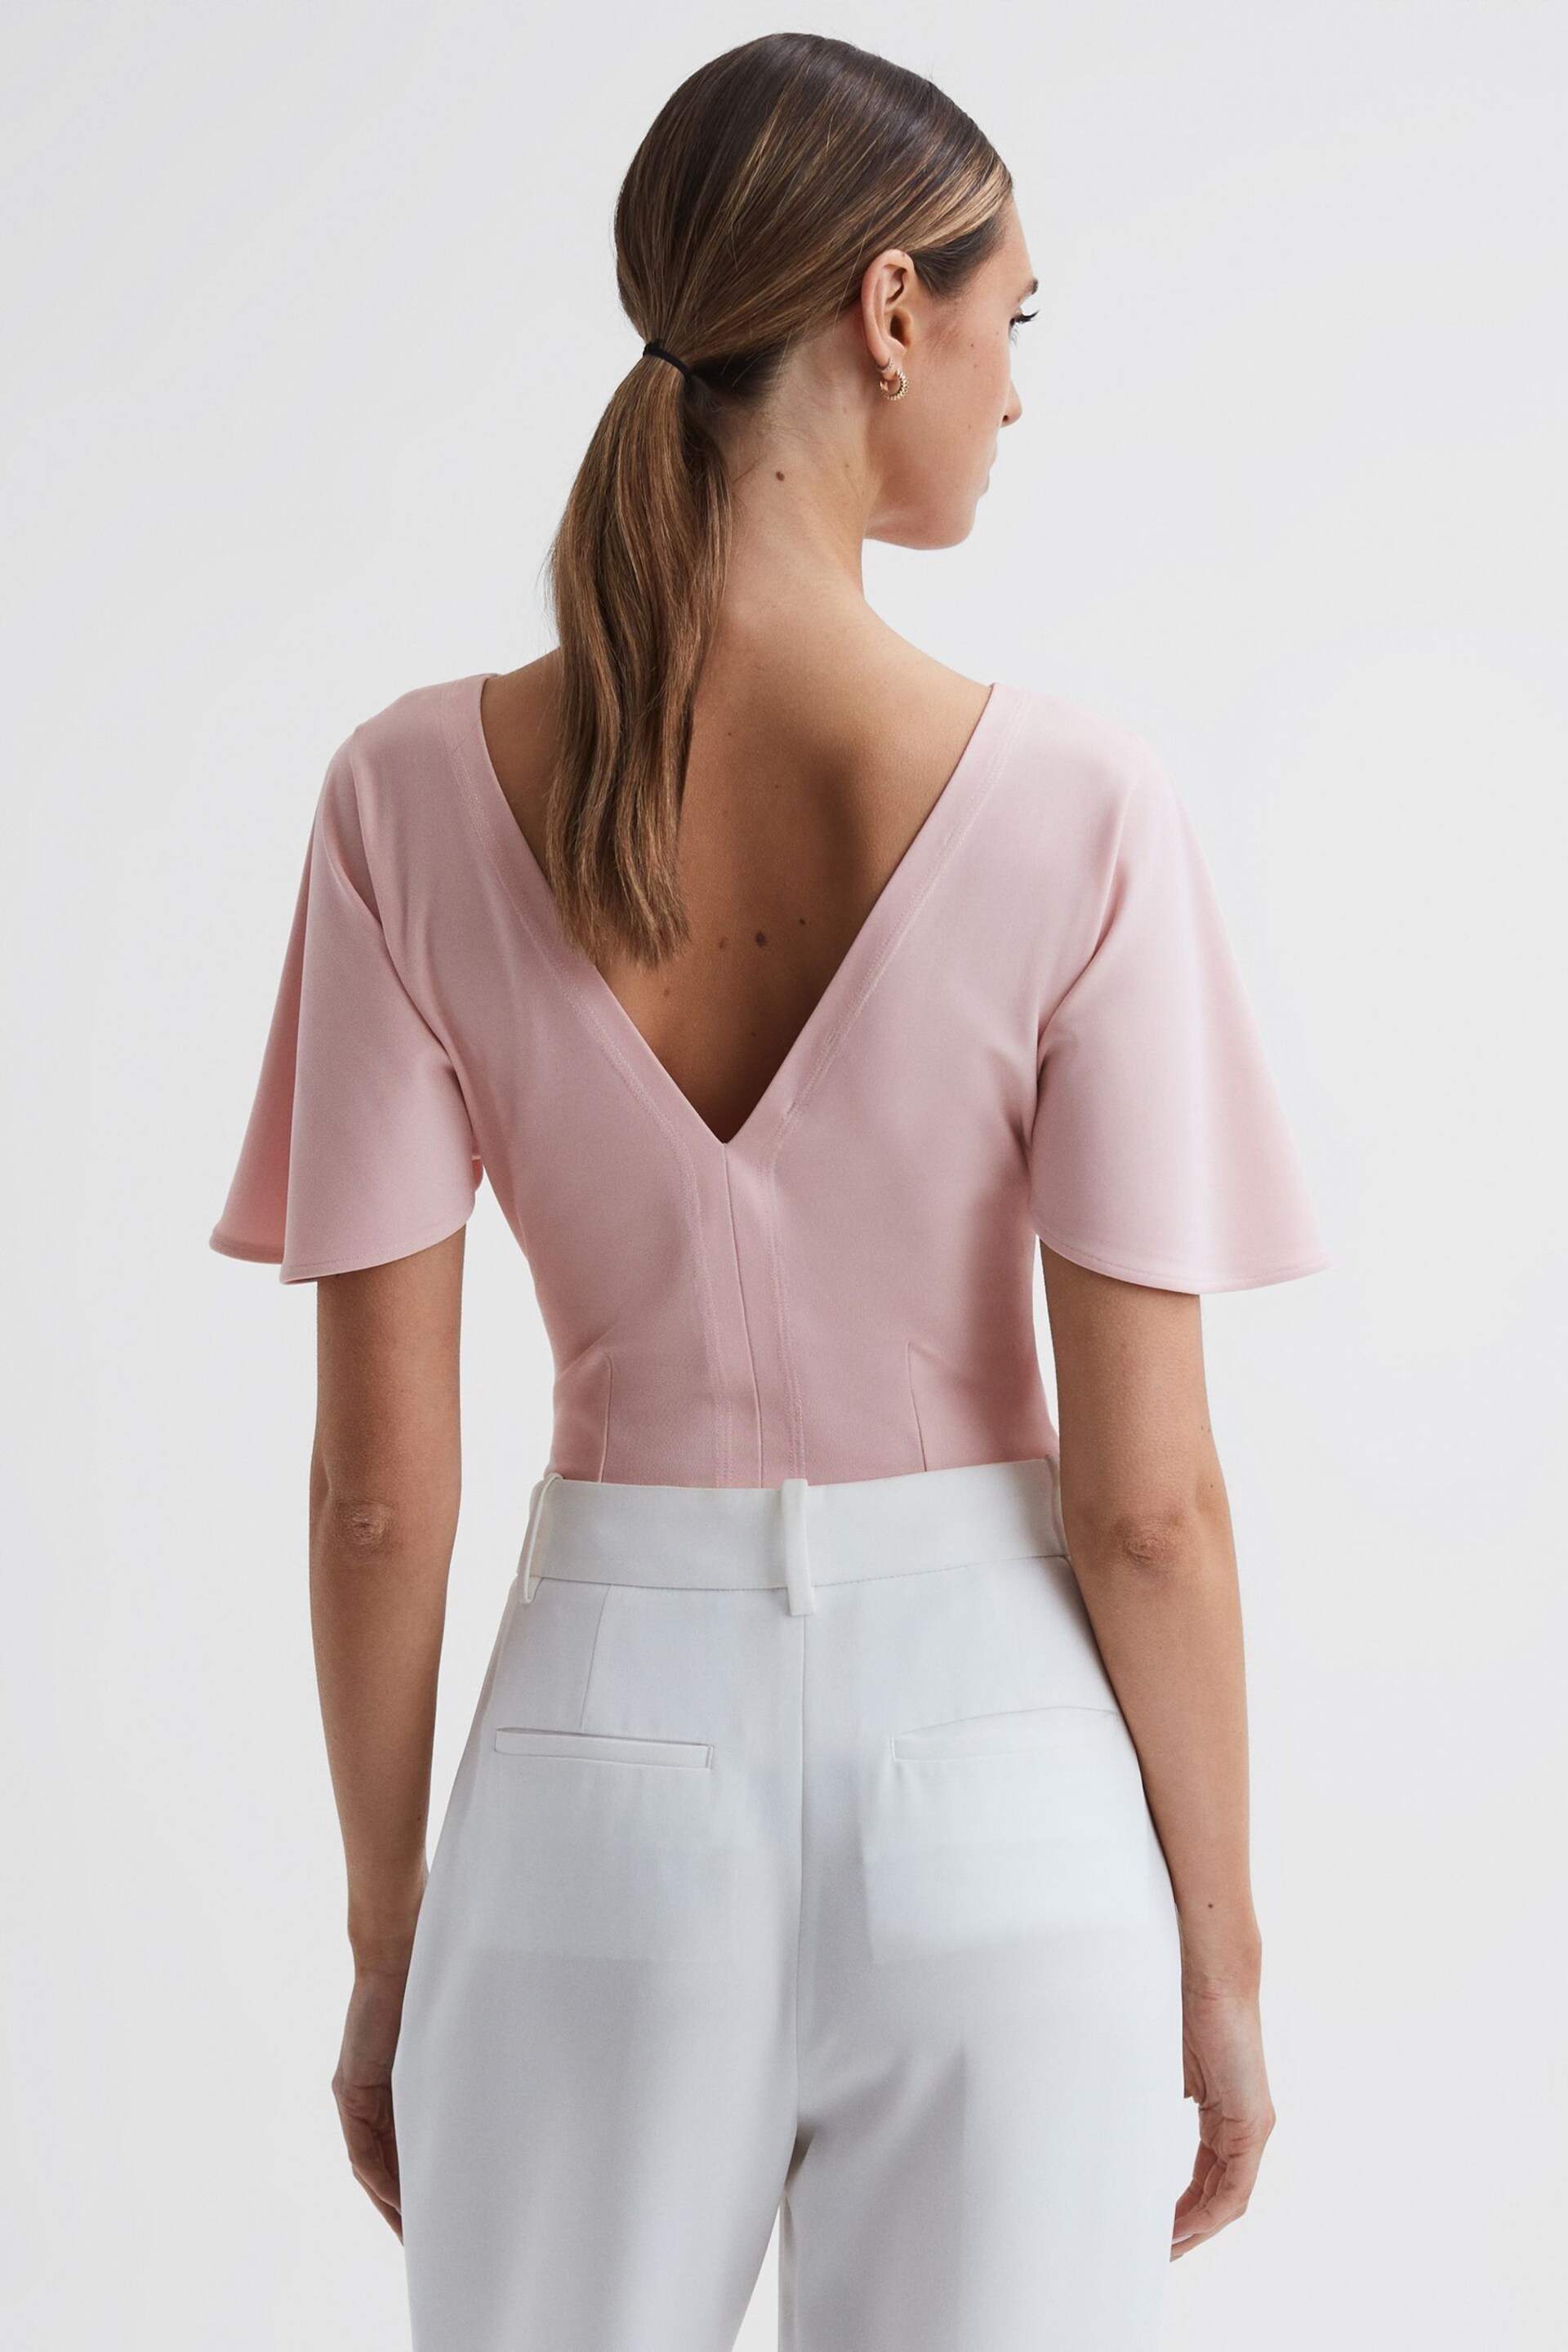 Reiss Light Pink Connie Fluid Sleeve T-Shirt - Image 4 of 4